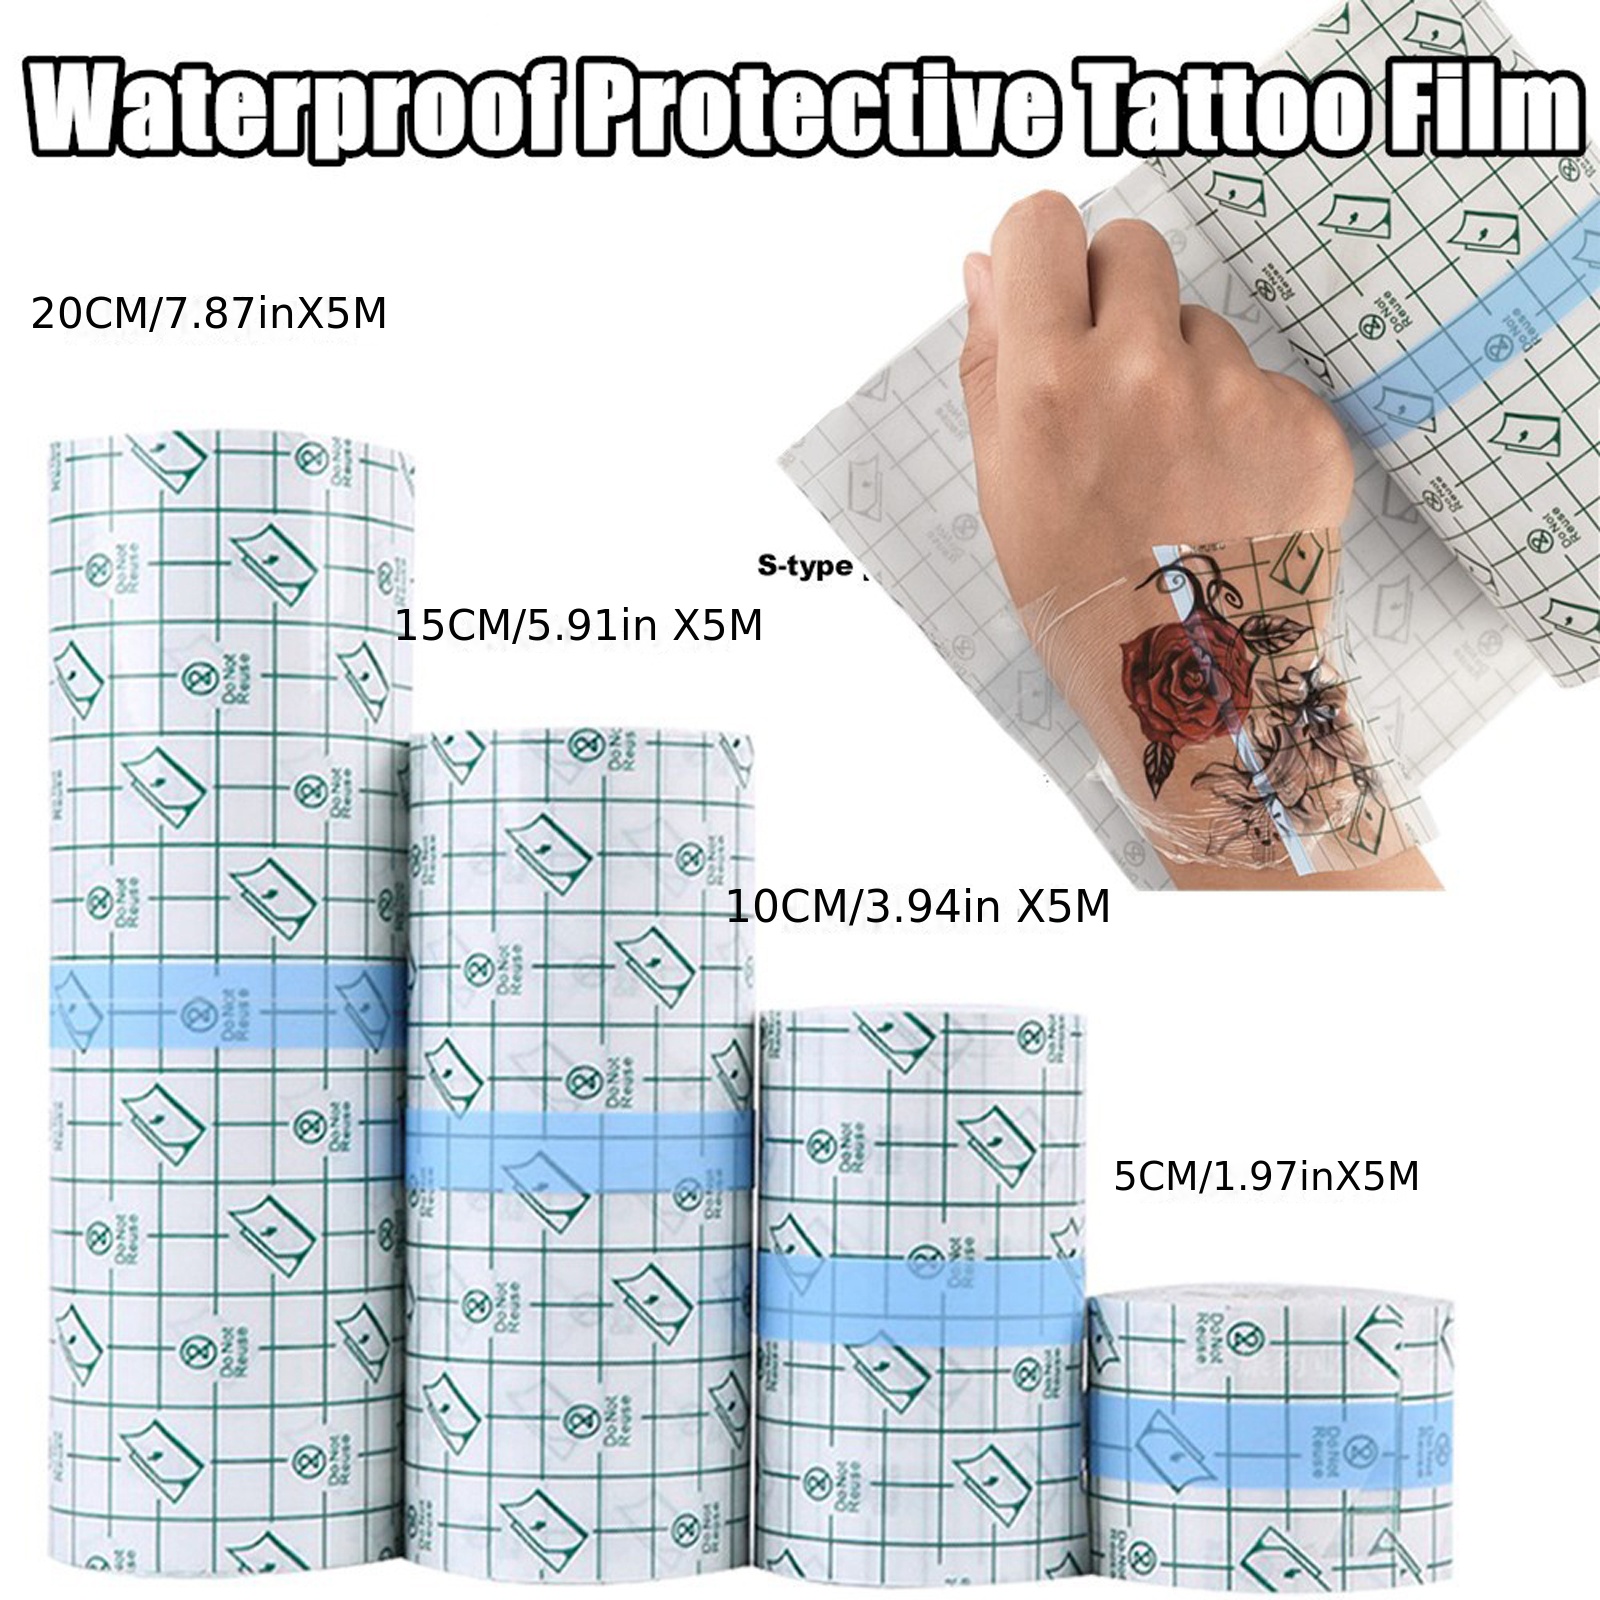 

1pc Transparent Adhesive Wrap Tattoo Aftercare Bandage, Waterproof Protective Film Tattoo Bandage Roll, Skin Dressing, For Swimming Tattoo Aftercare Supplies